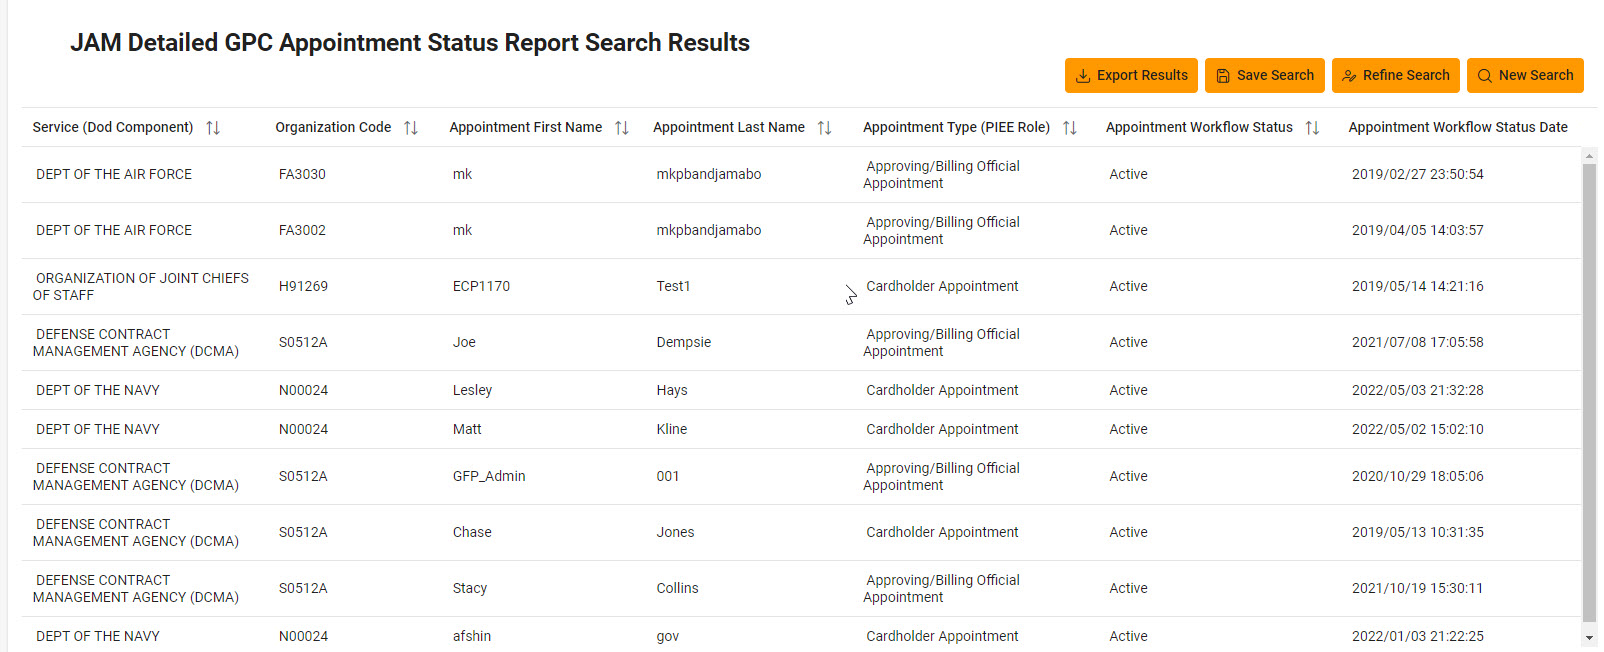 The image provides a preview of the JAM Detailed GPC Appointment Status Report Search Results page.